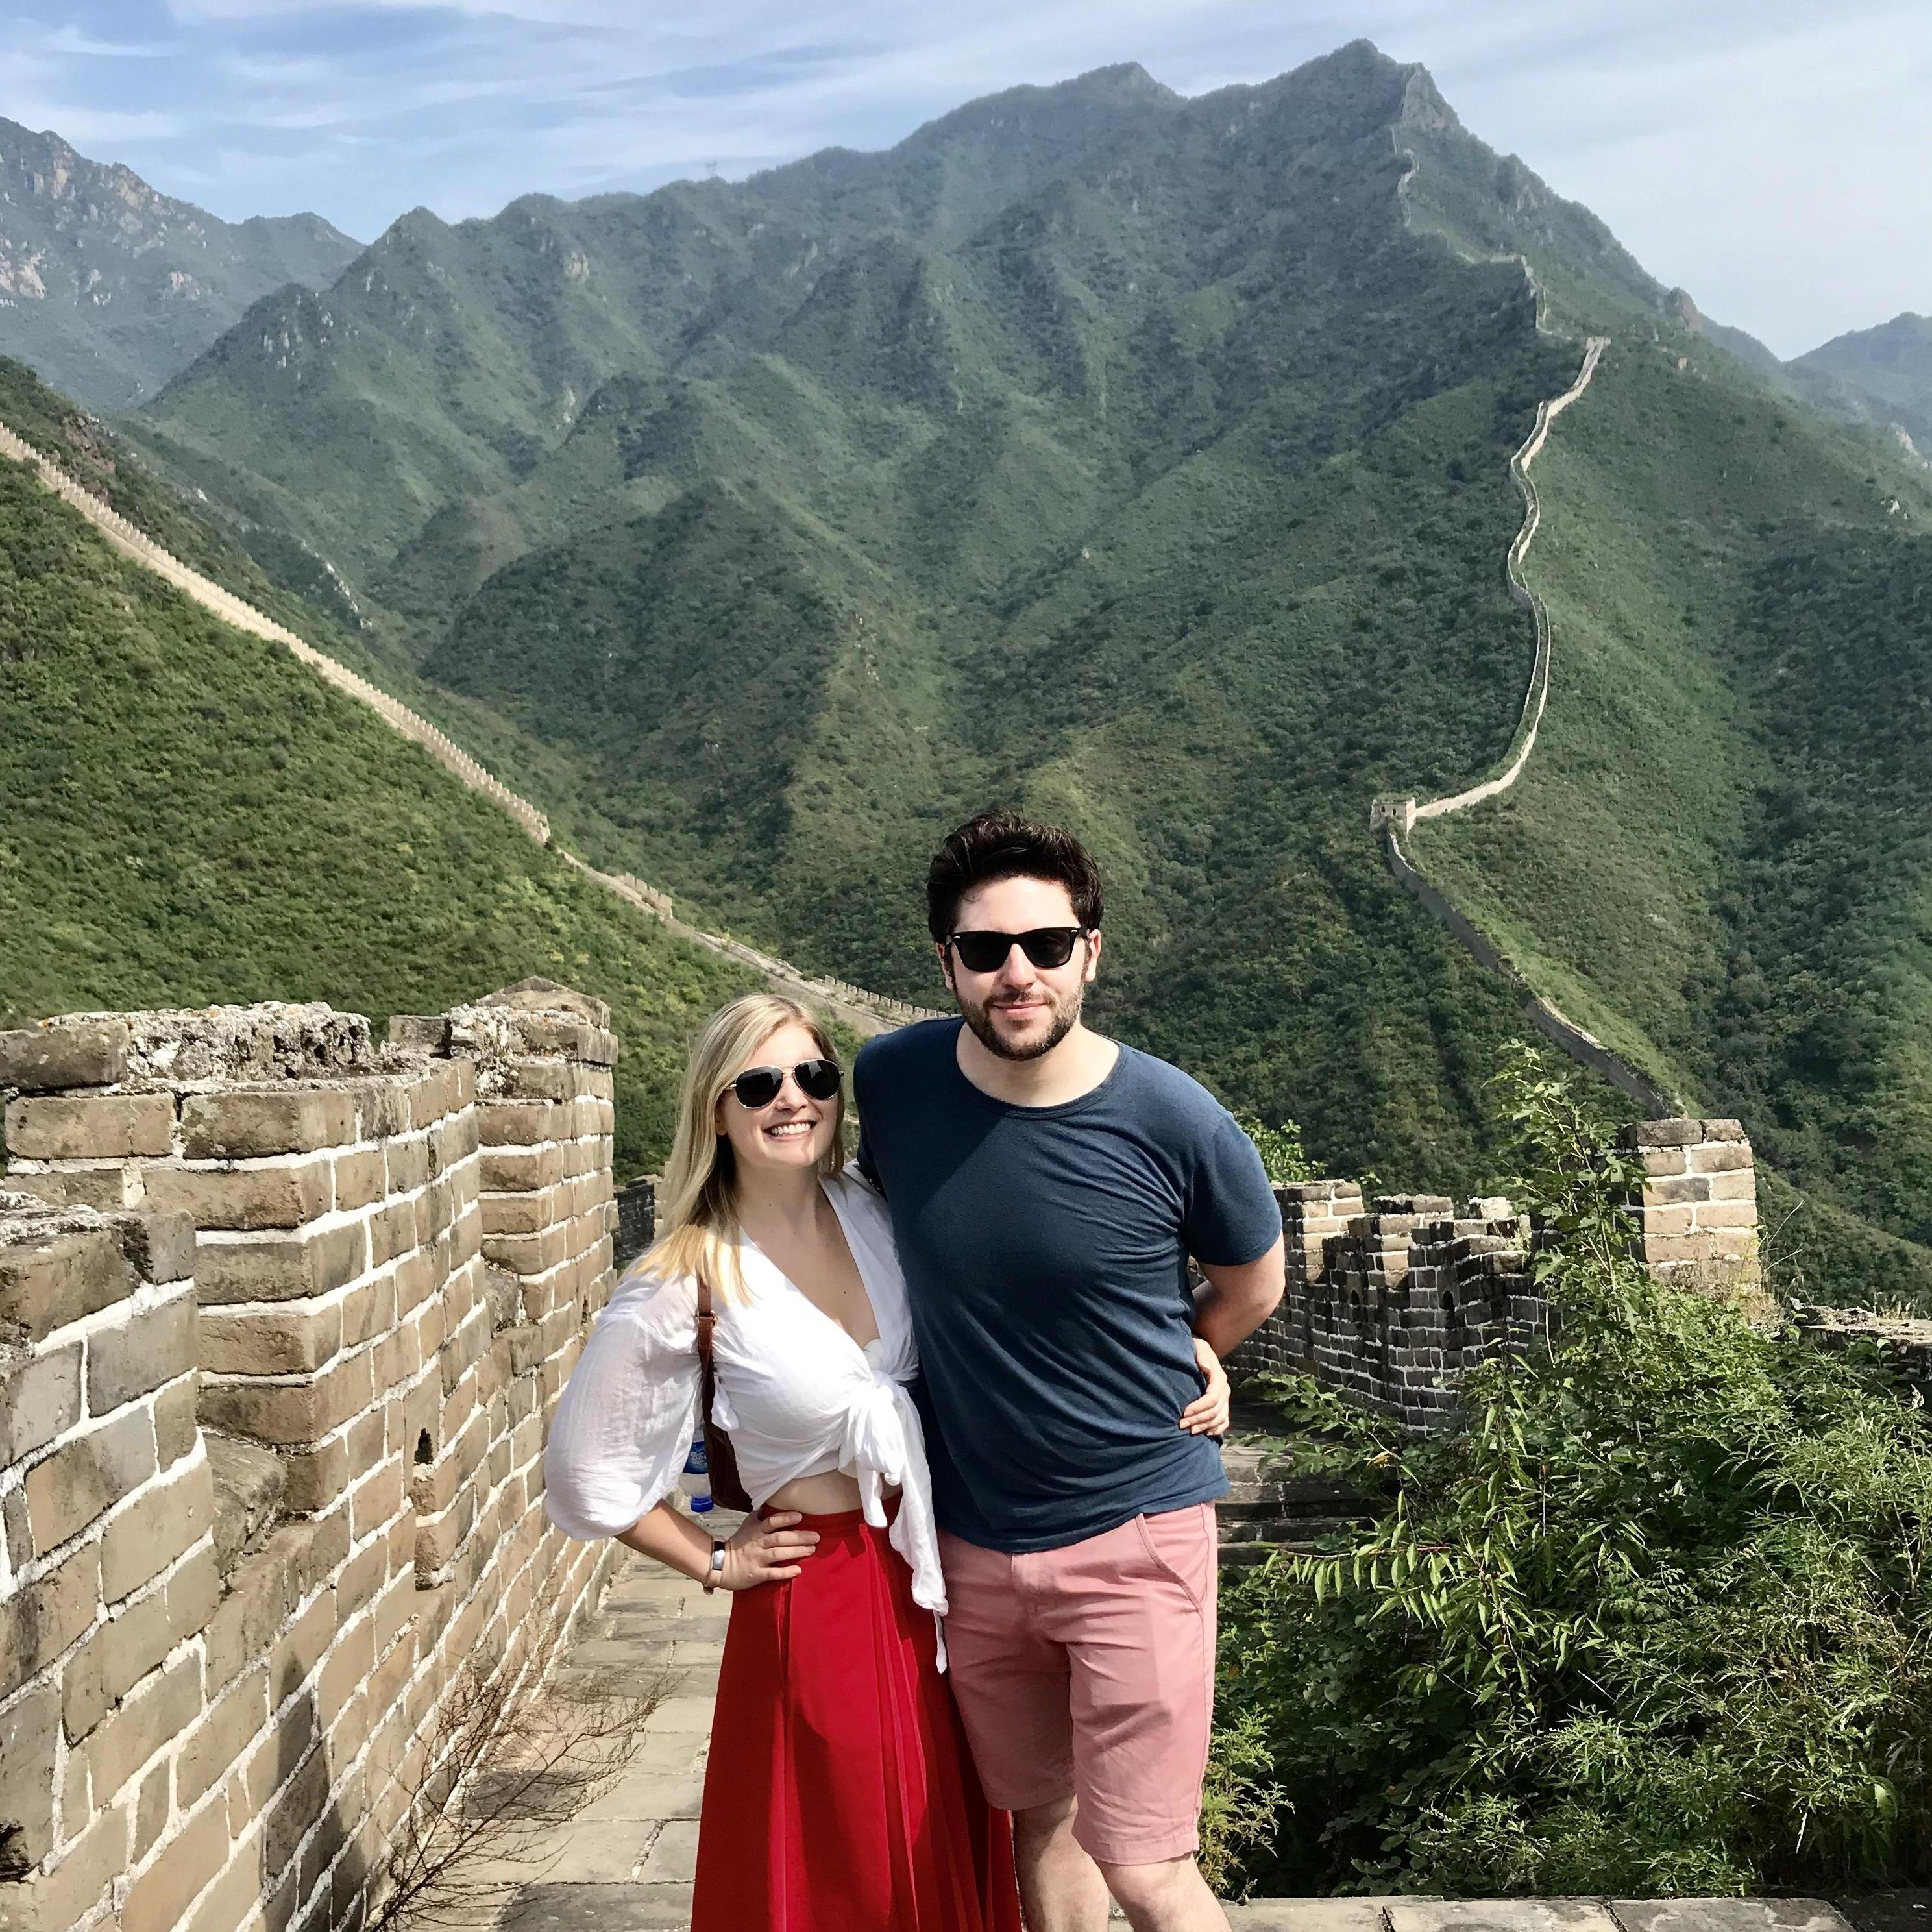 A perfectly secluded spot of China's Great Wall 
2019